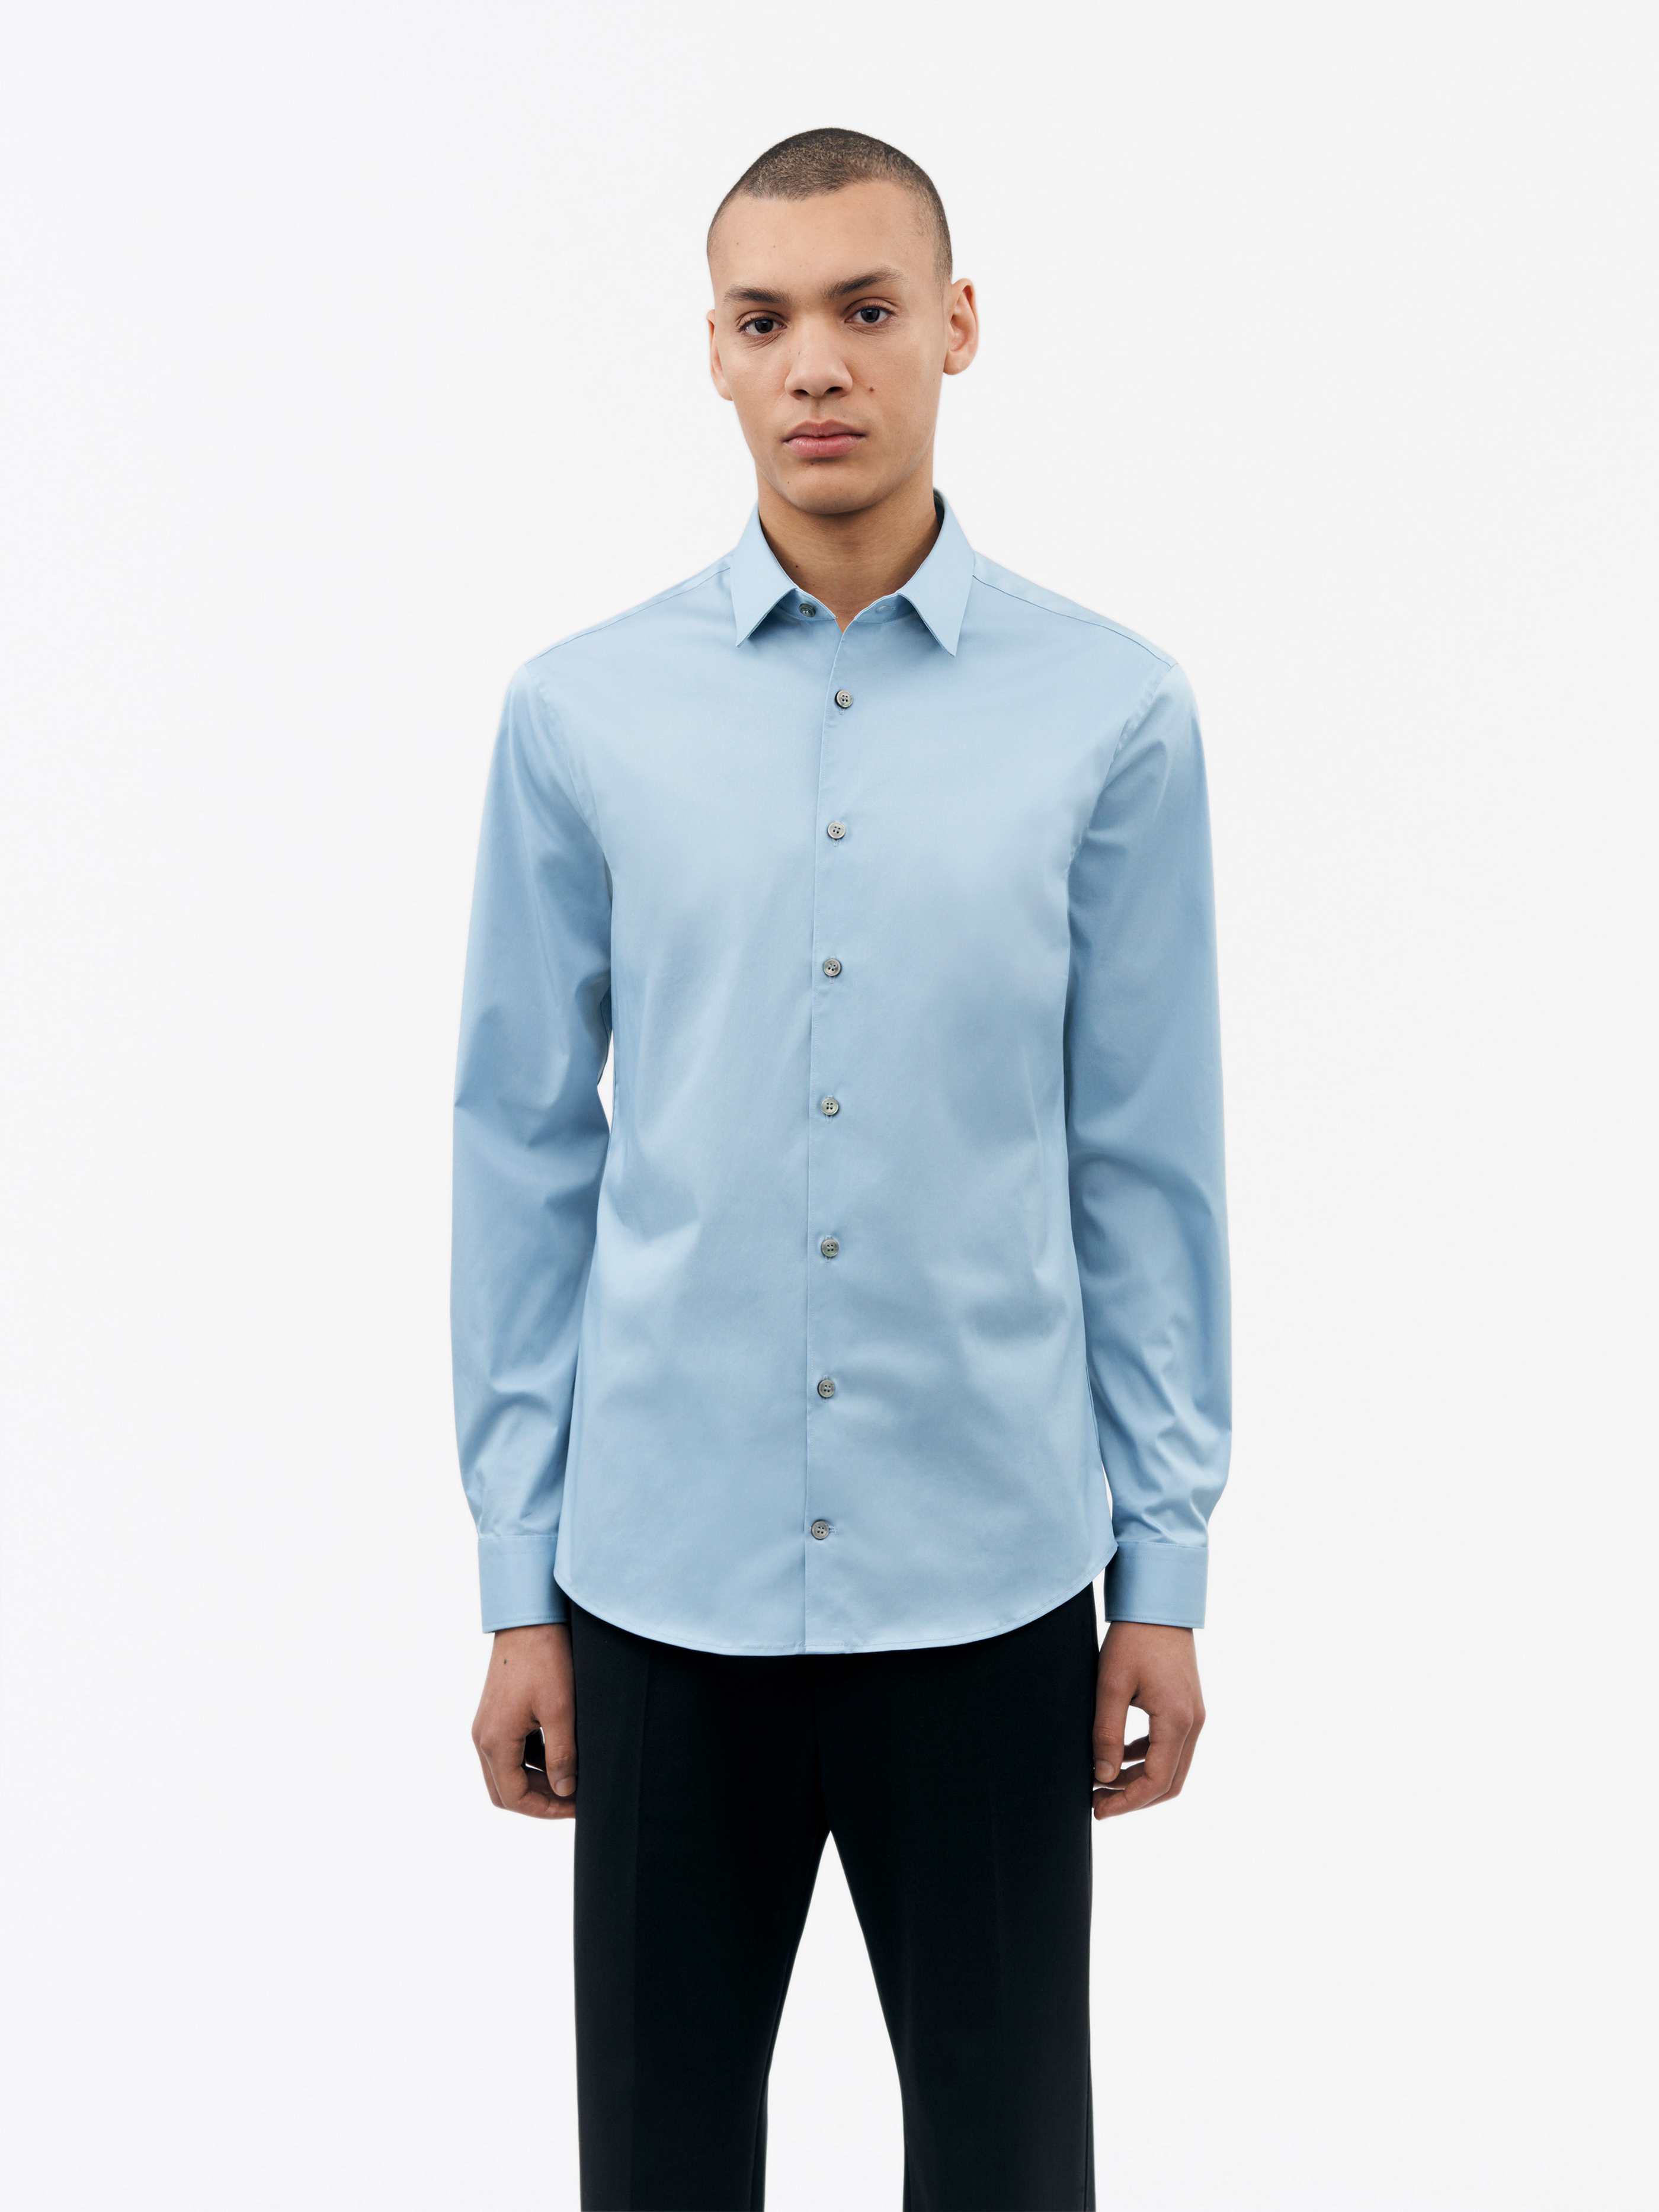 TIGER OF SWEDEN Filbrodie Shirt in Light Blue T68997029 2BF-SHADY BLUE FROM EIGHTYWINGOLD - OFFICIAL BRAND PARTNER